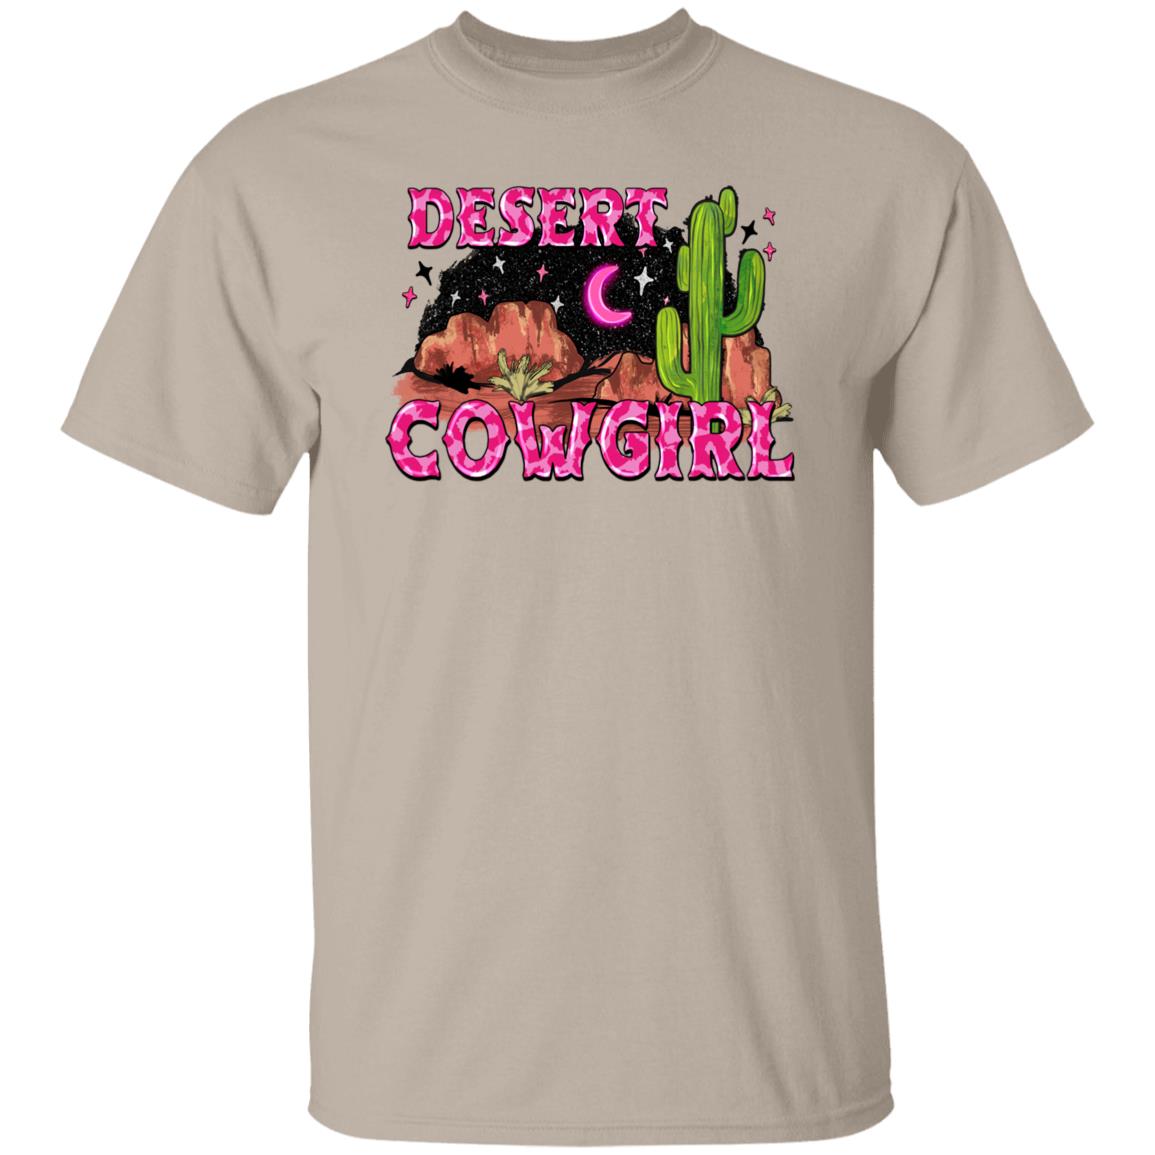 Desert cowgirl T-Shirt gift Western Night desert cactus pink cowgirl Tee Sand White Sport Grey-Family-Gift-Planet